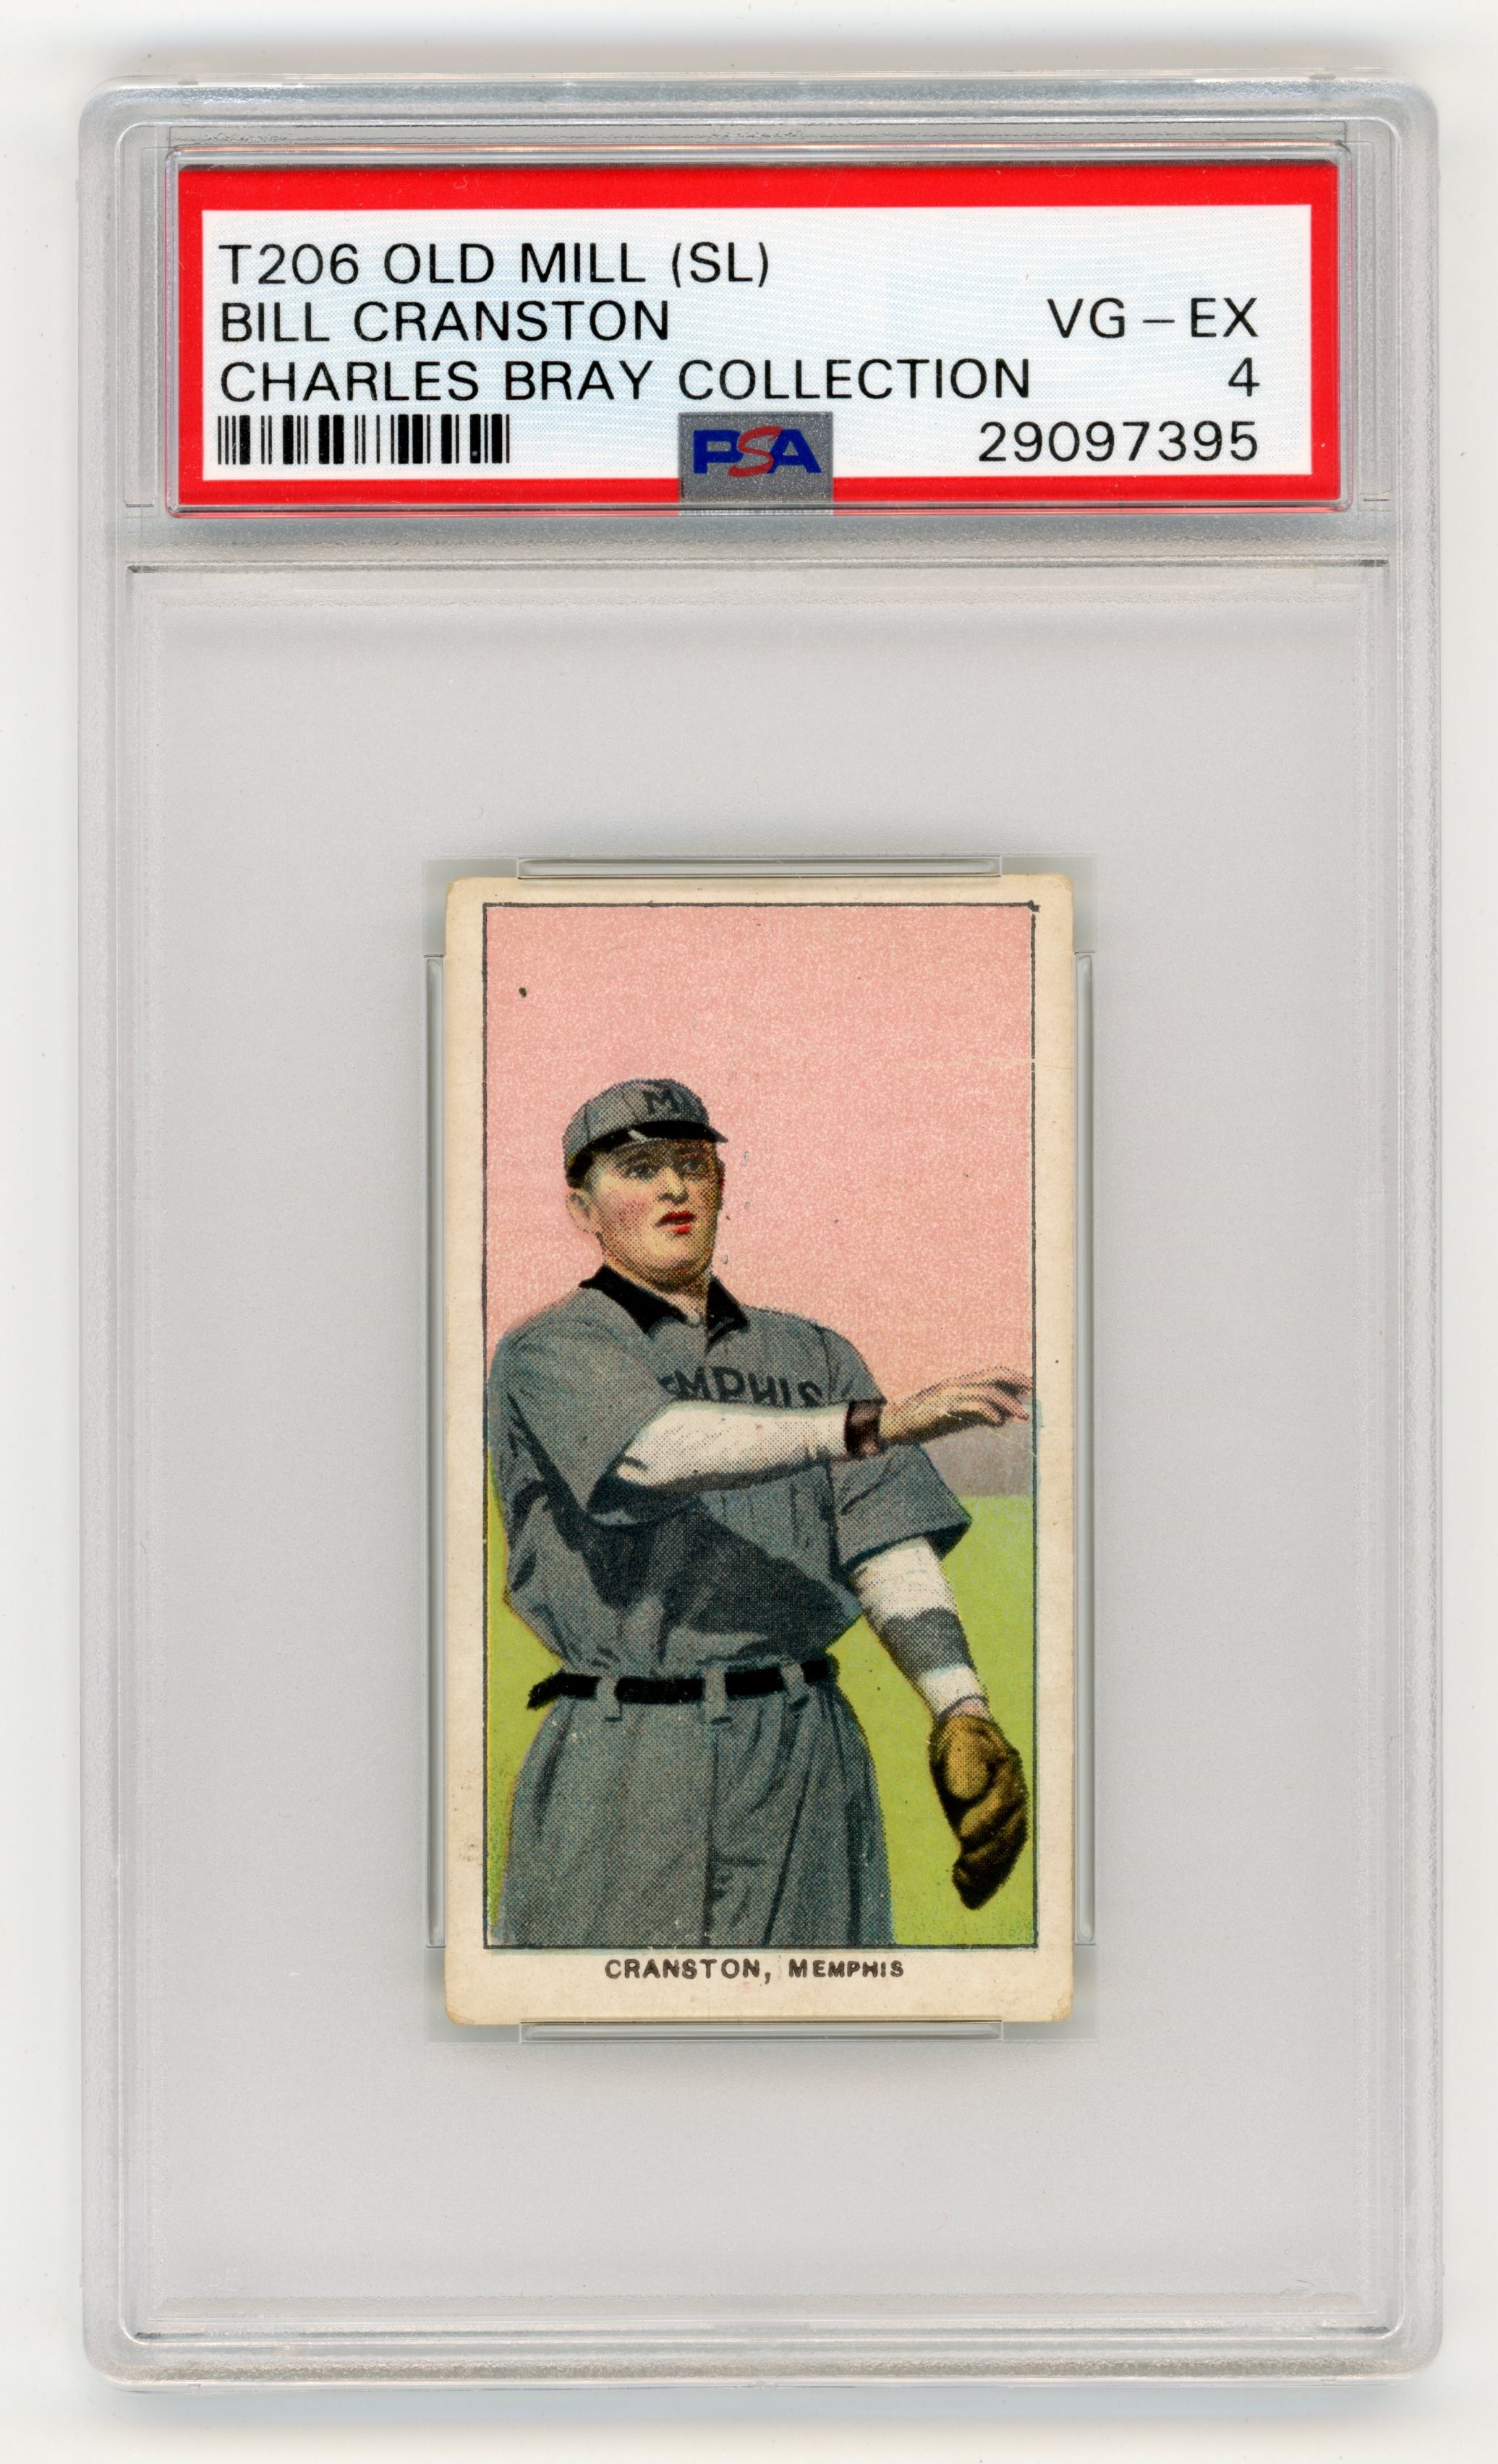 Baseball and Trading Cards - T206 Old Mill (SL) Bill Cranston PSA VG-EX 4 From the Charles Bray Collection.